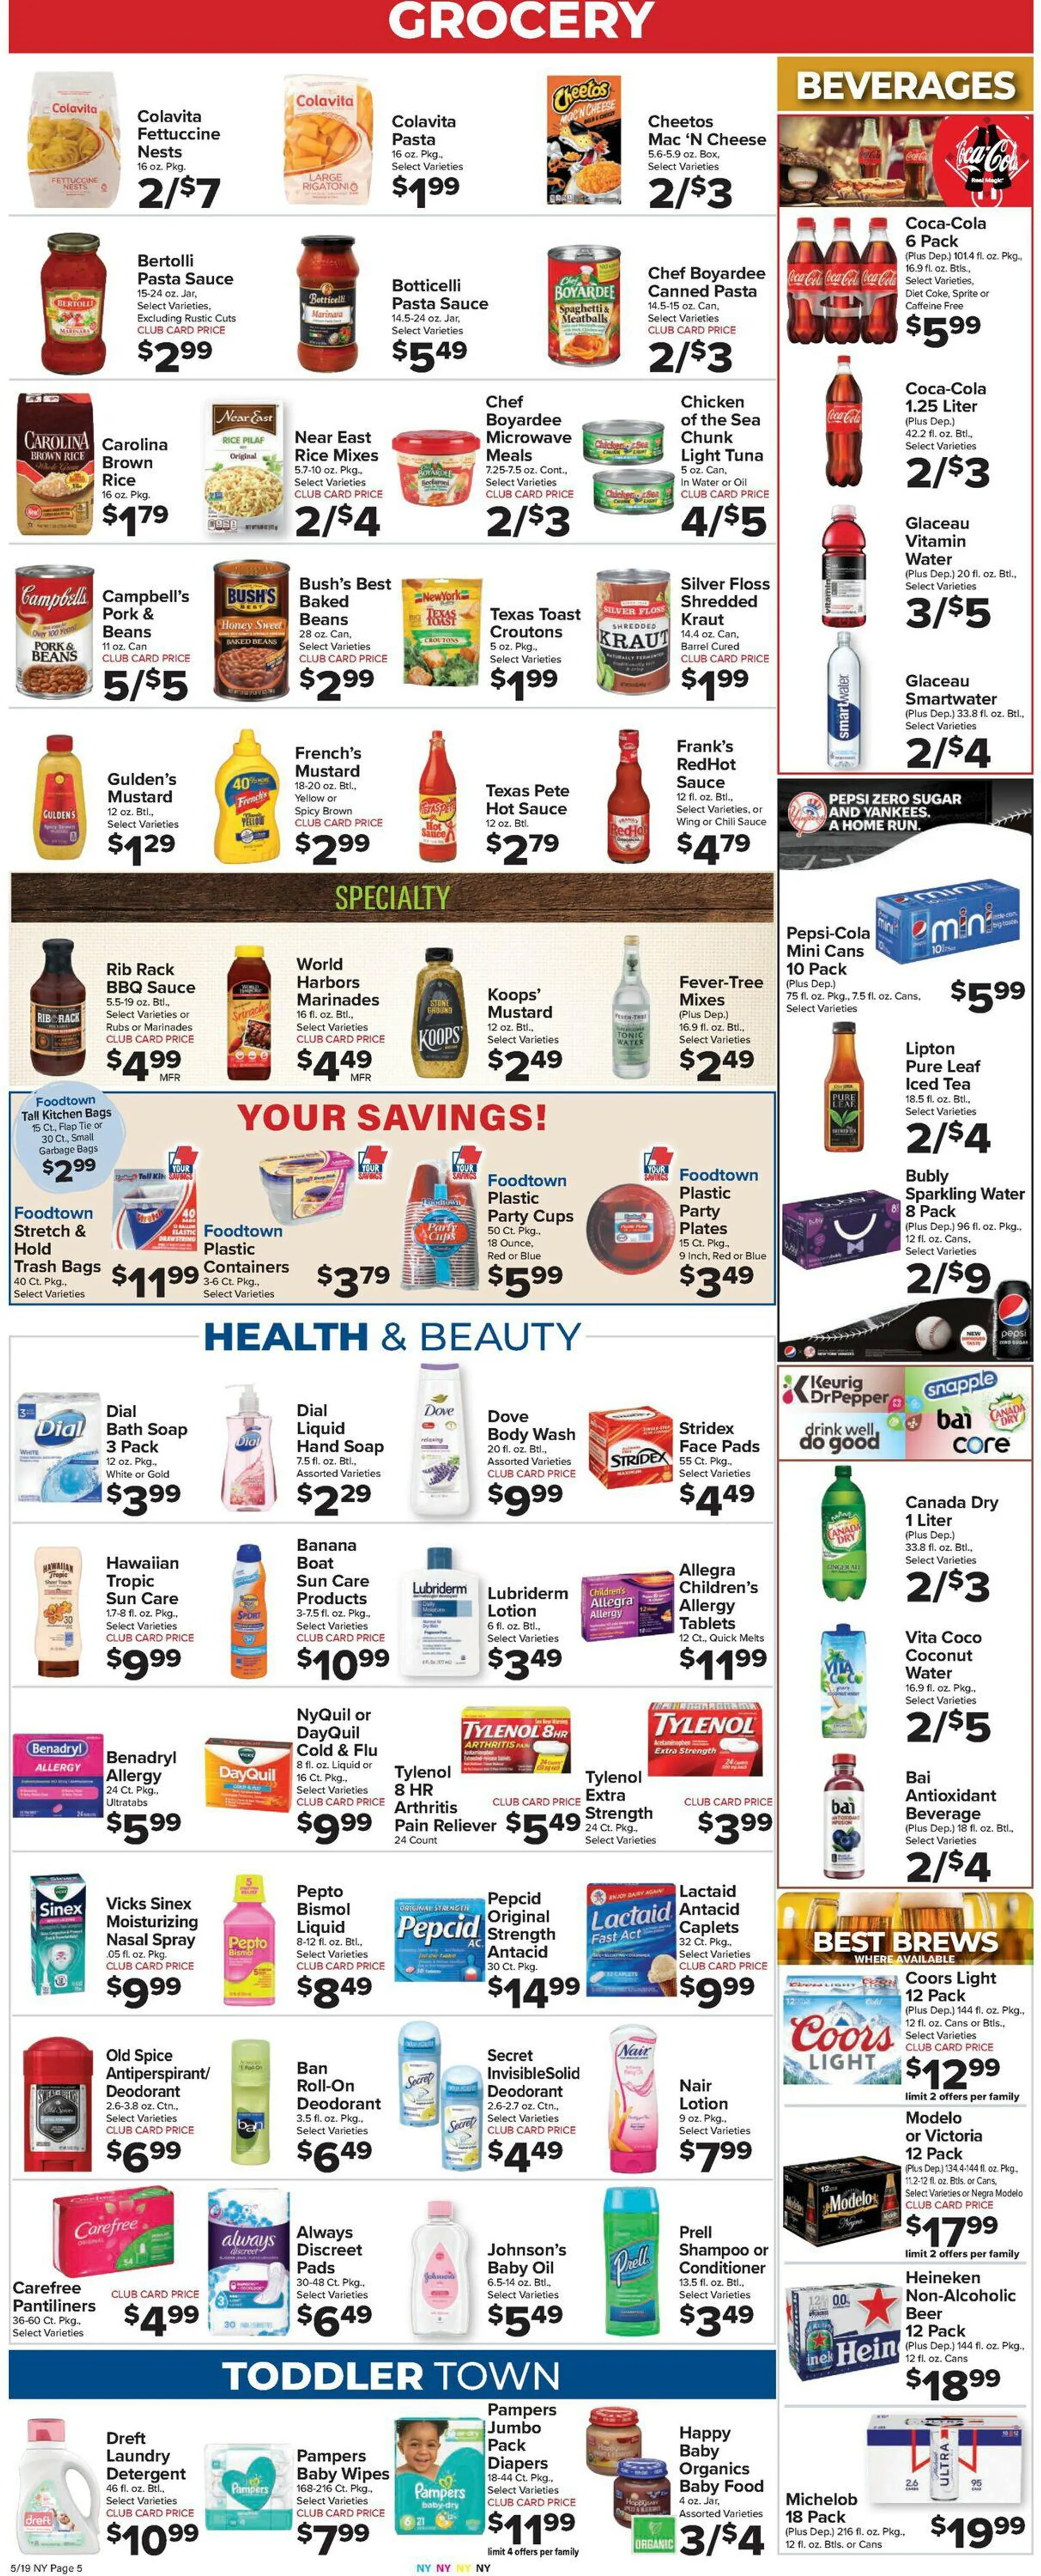 Foodtown Current weekly ad - 7